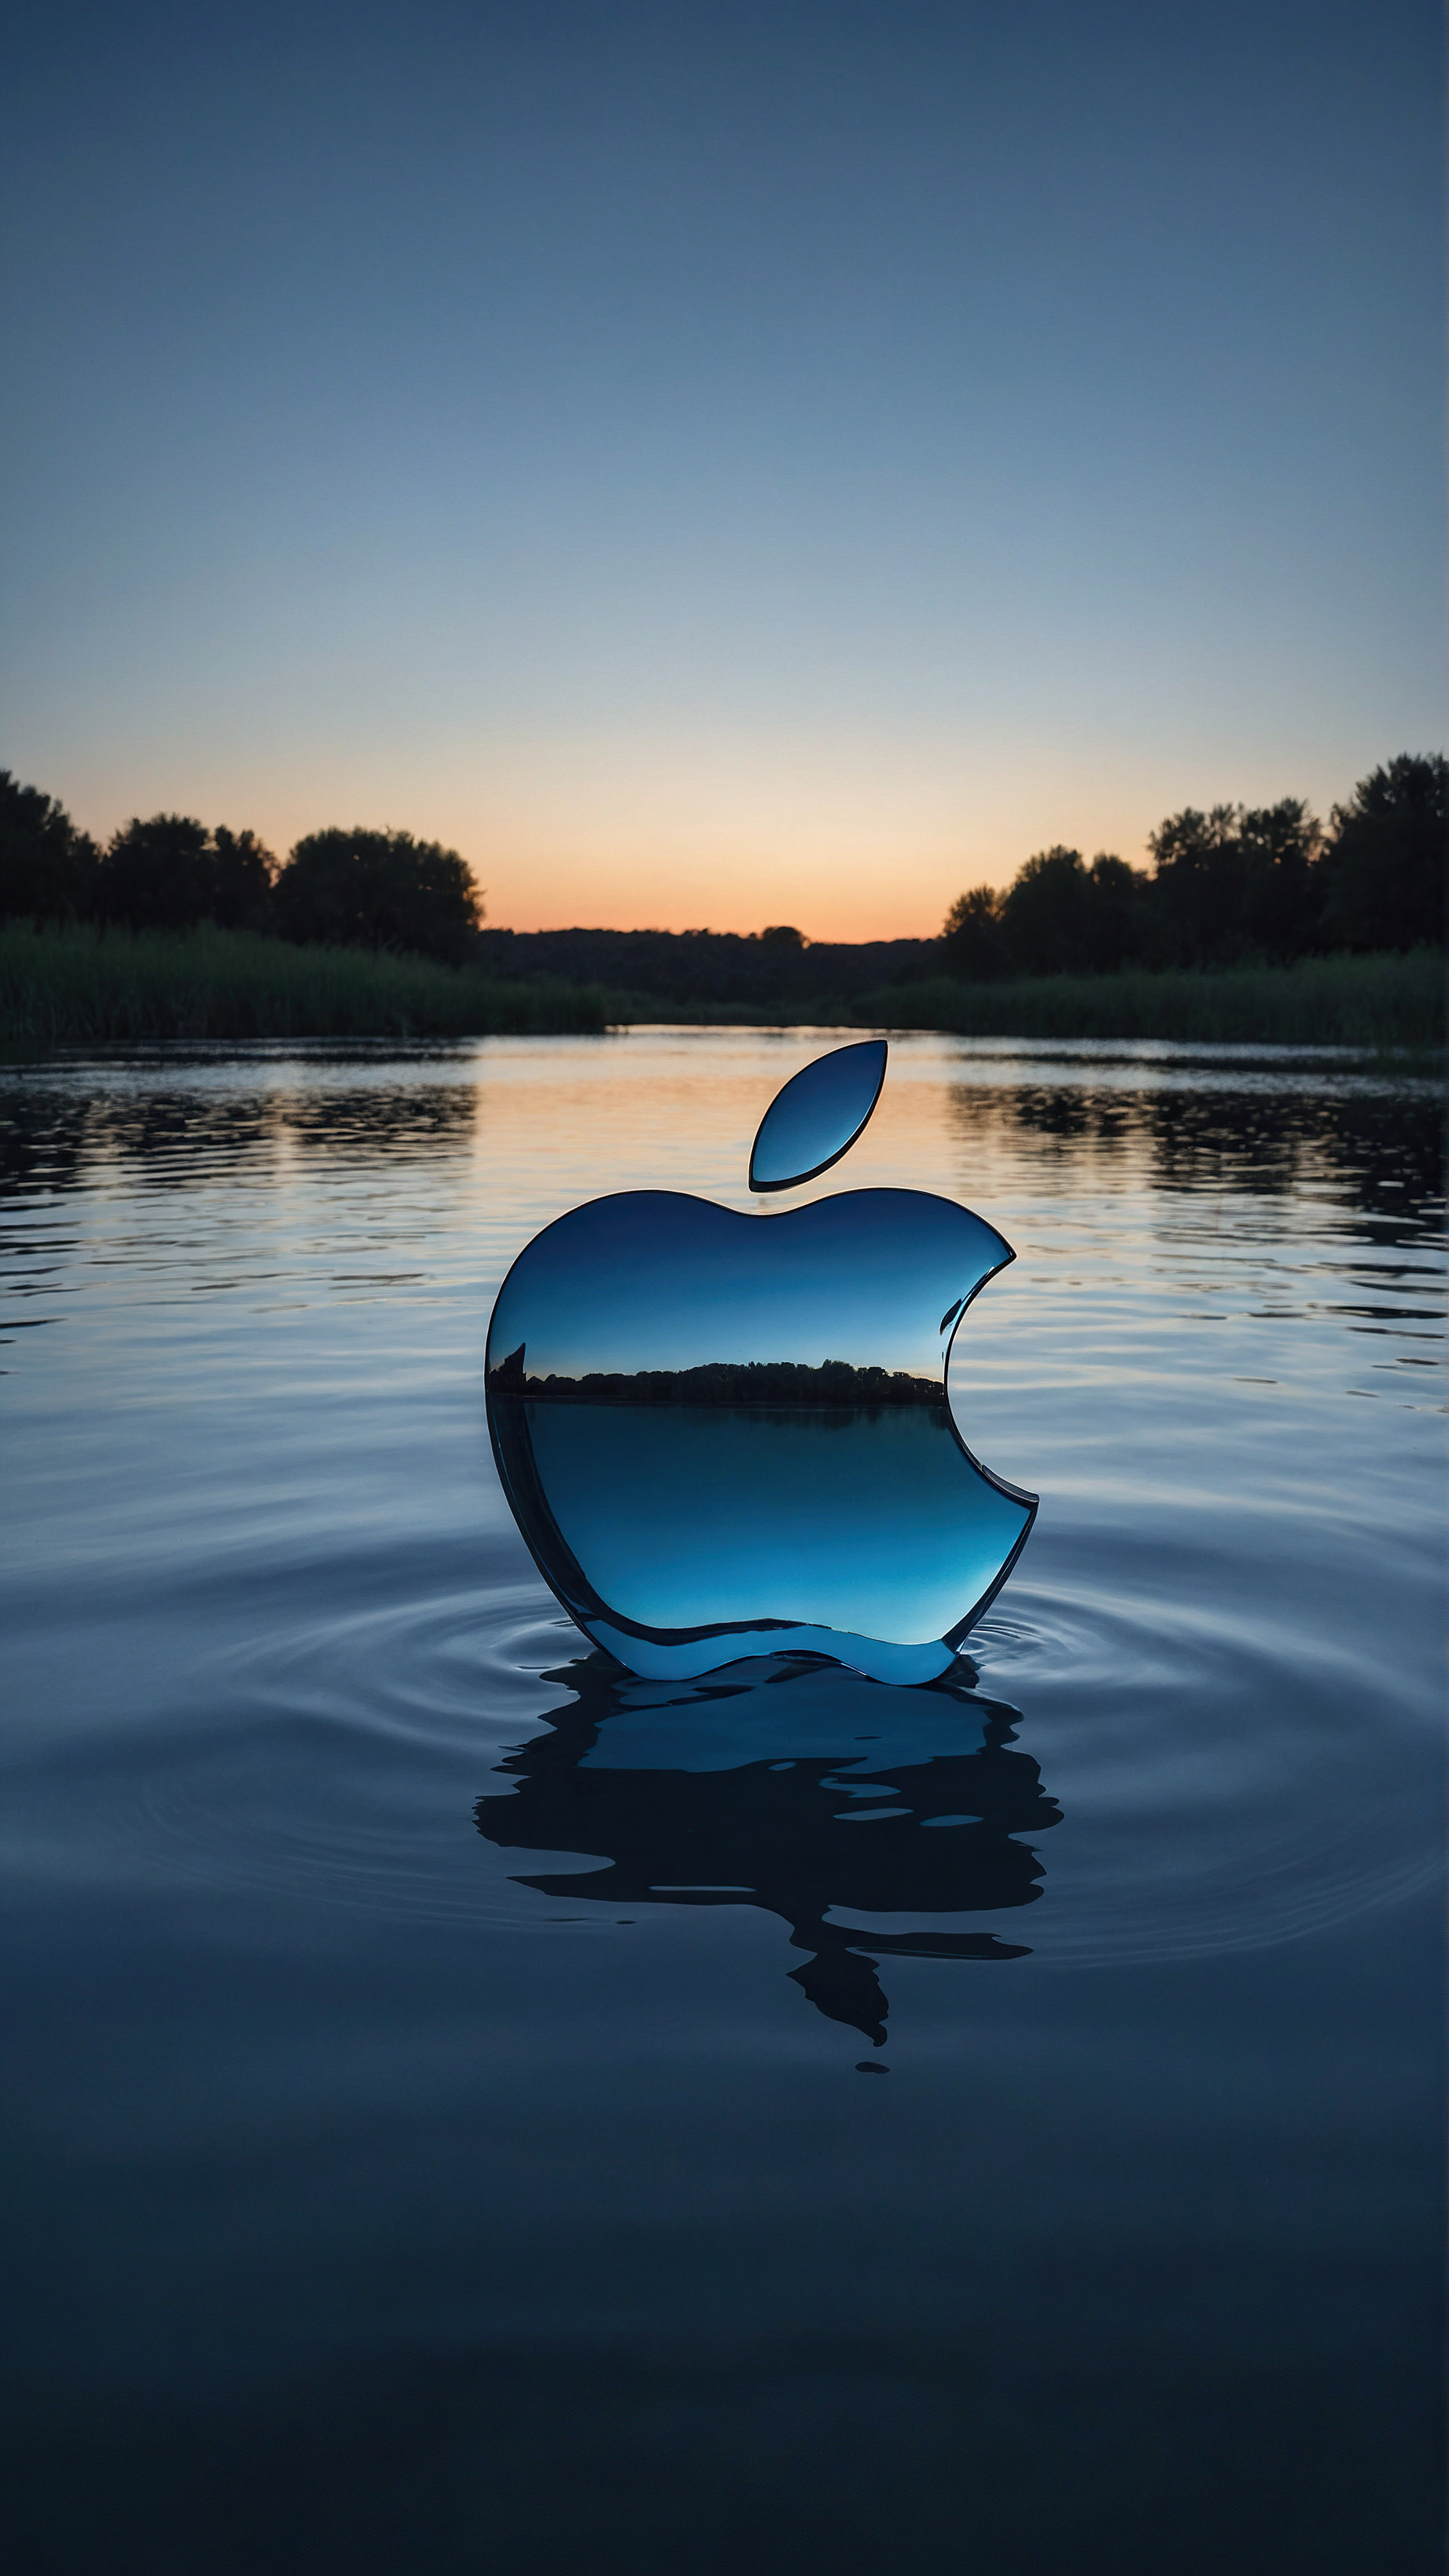 Adorn your screen with wallpaper in 4K for iPhone, showcasing a serene landscape at dawn, with tranquil waters reflecting the soft hues of the sky and a glowing iconic Apple logo appearing to float above the water’s surface.